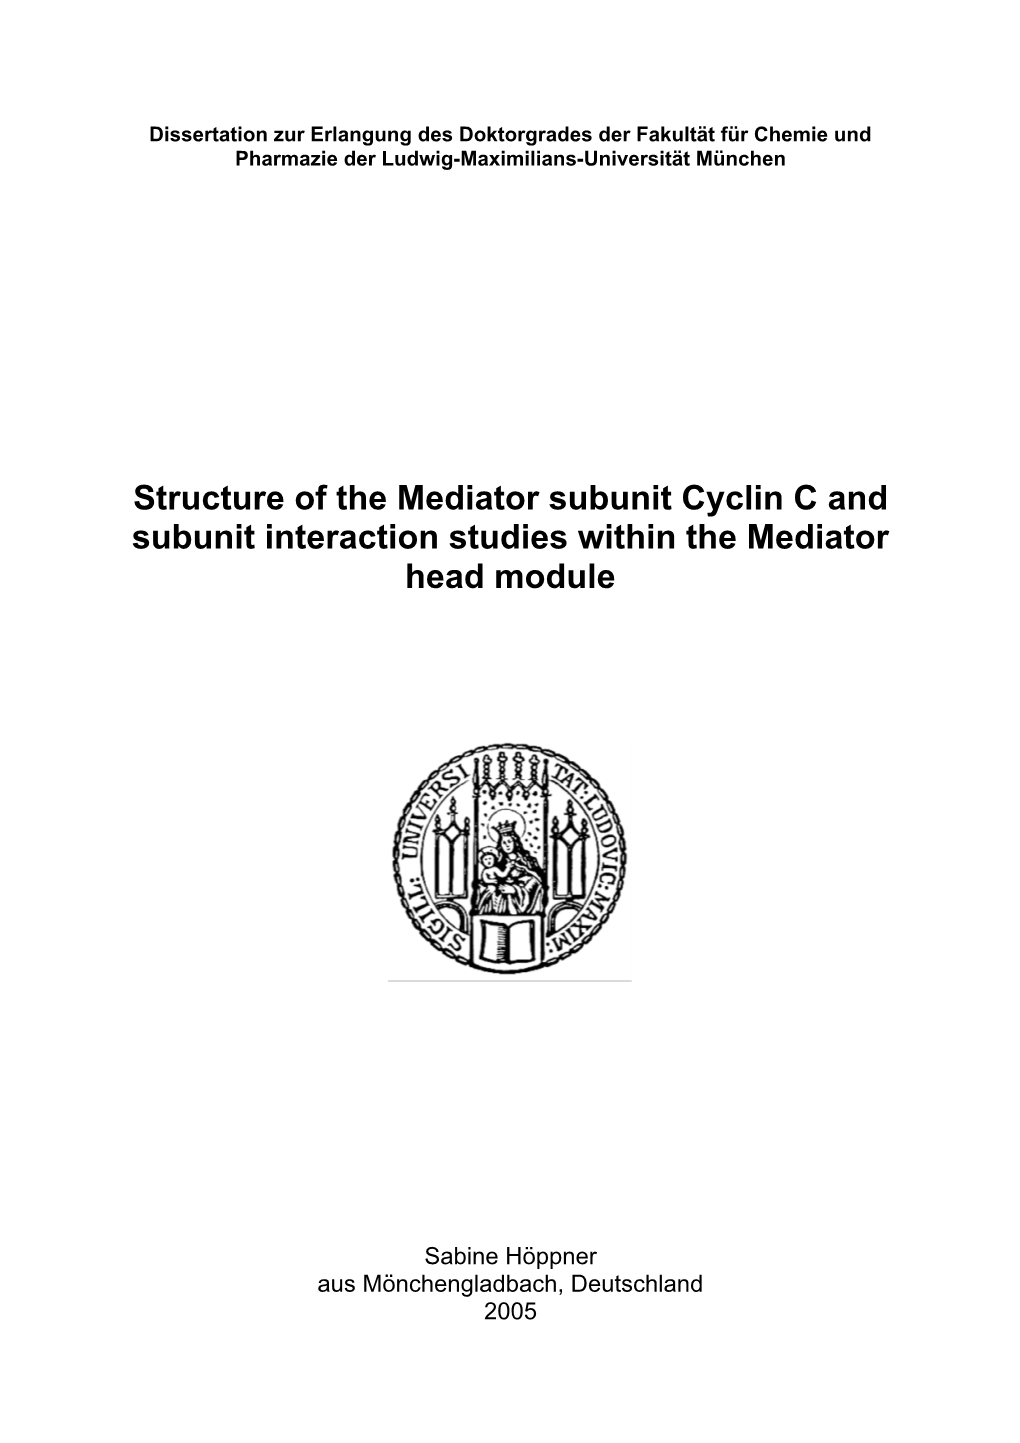 Structure of the Mediator Subunit Cyclin C and Subunit Interaction Studies Within the Mediator Head Module